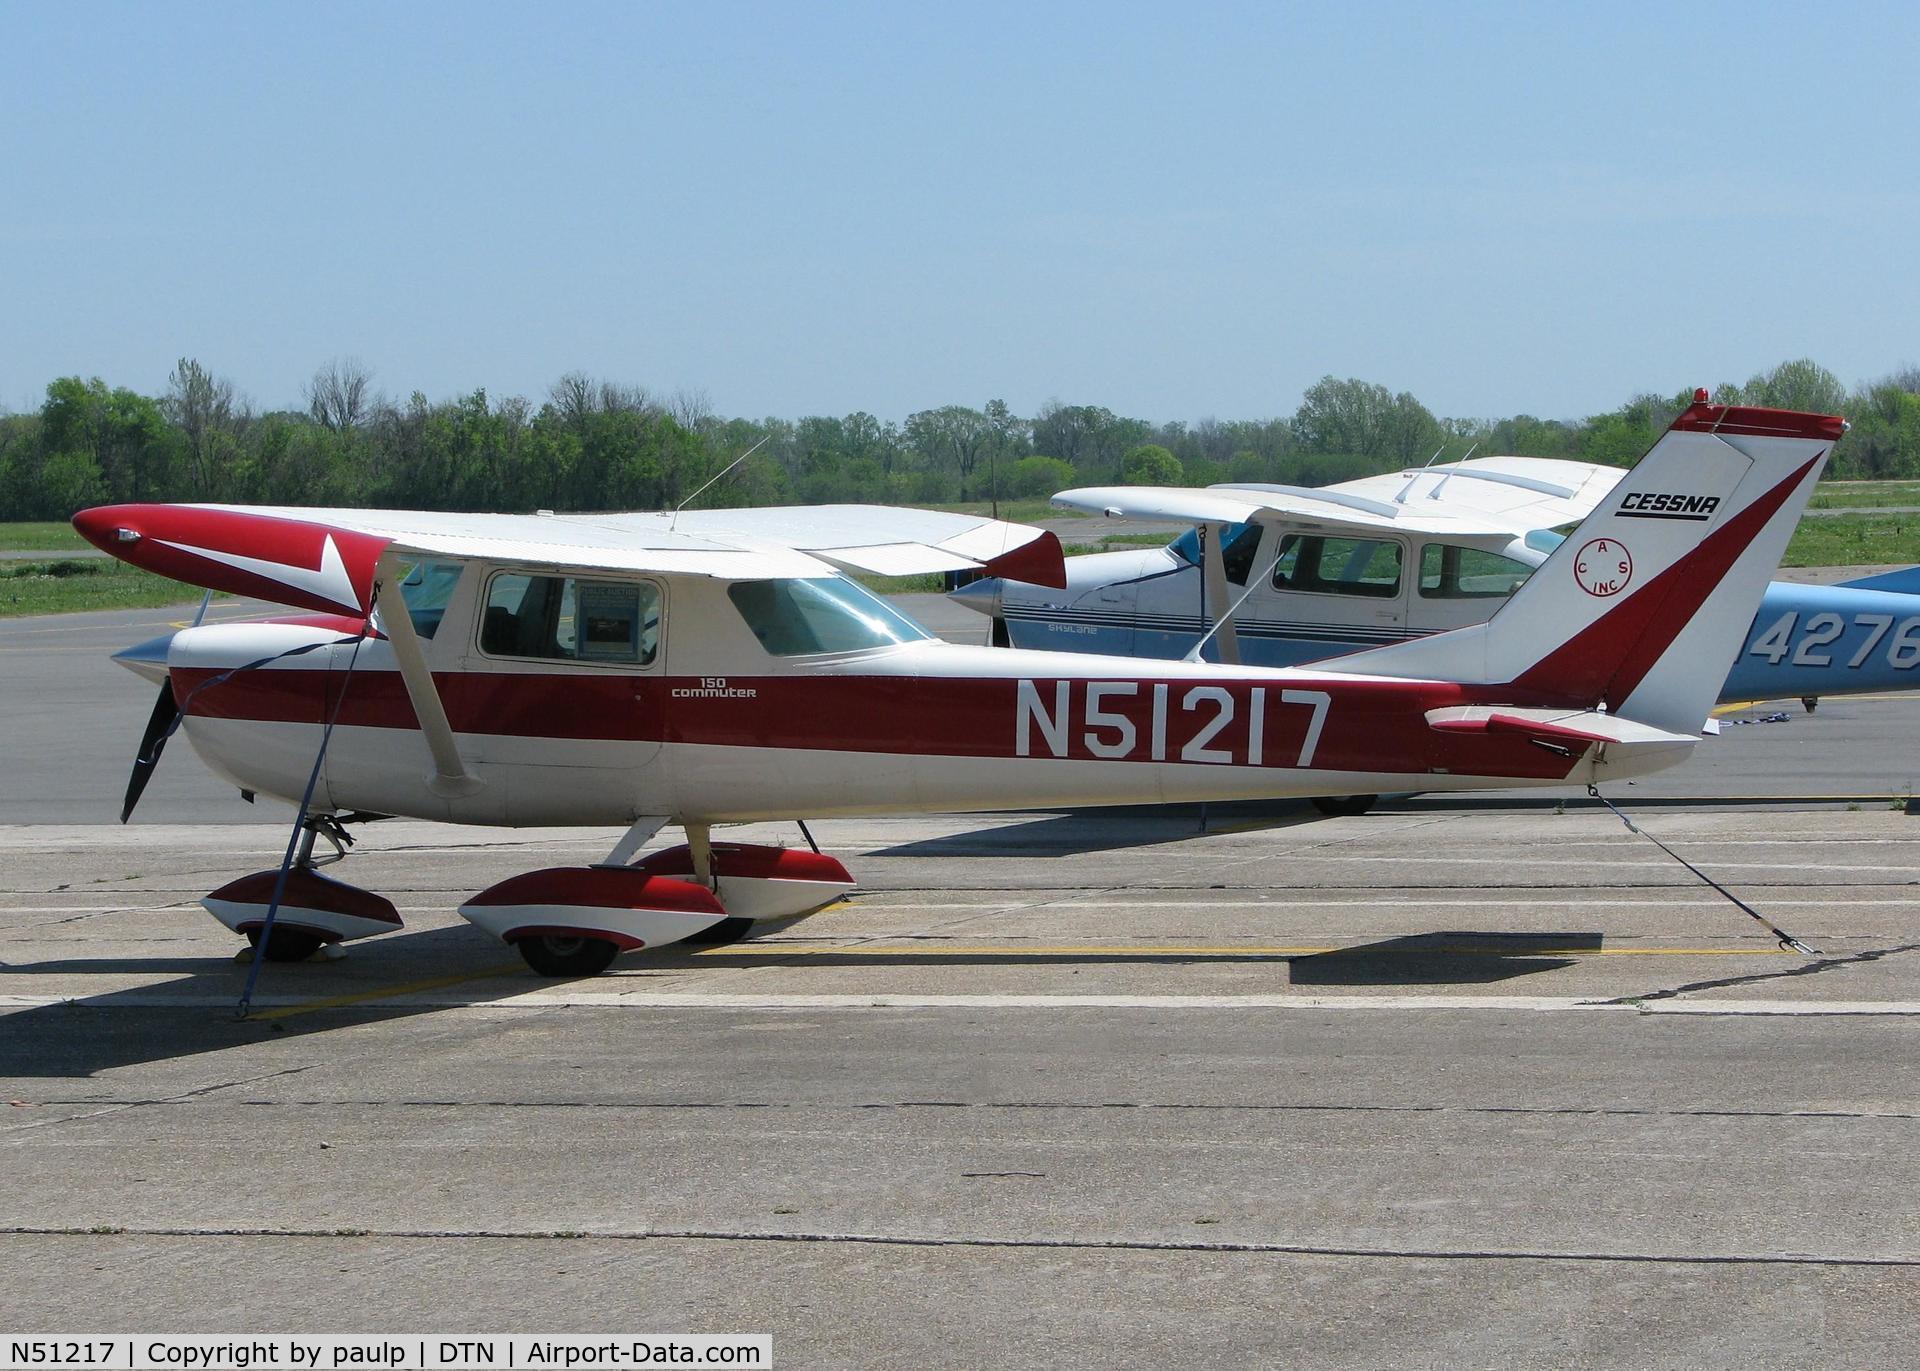 N51217, 1968 Cessna 150J C/N 15069843, Parked at the Shreveport Downtown airport.